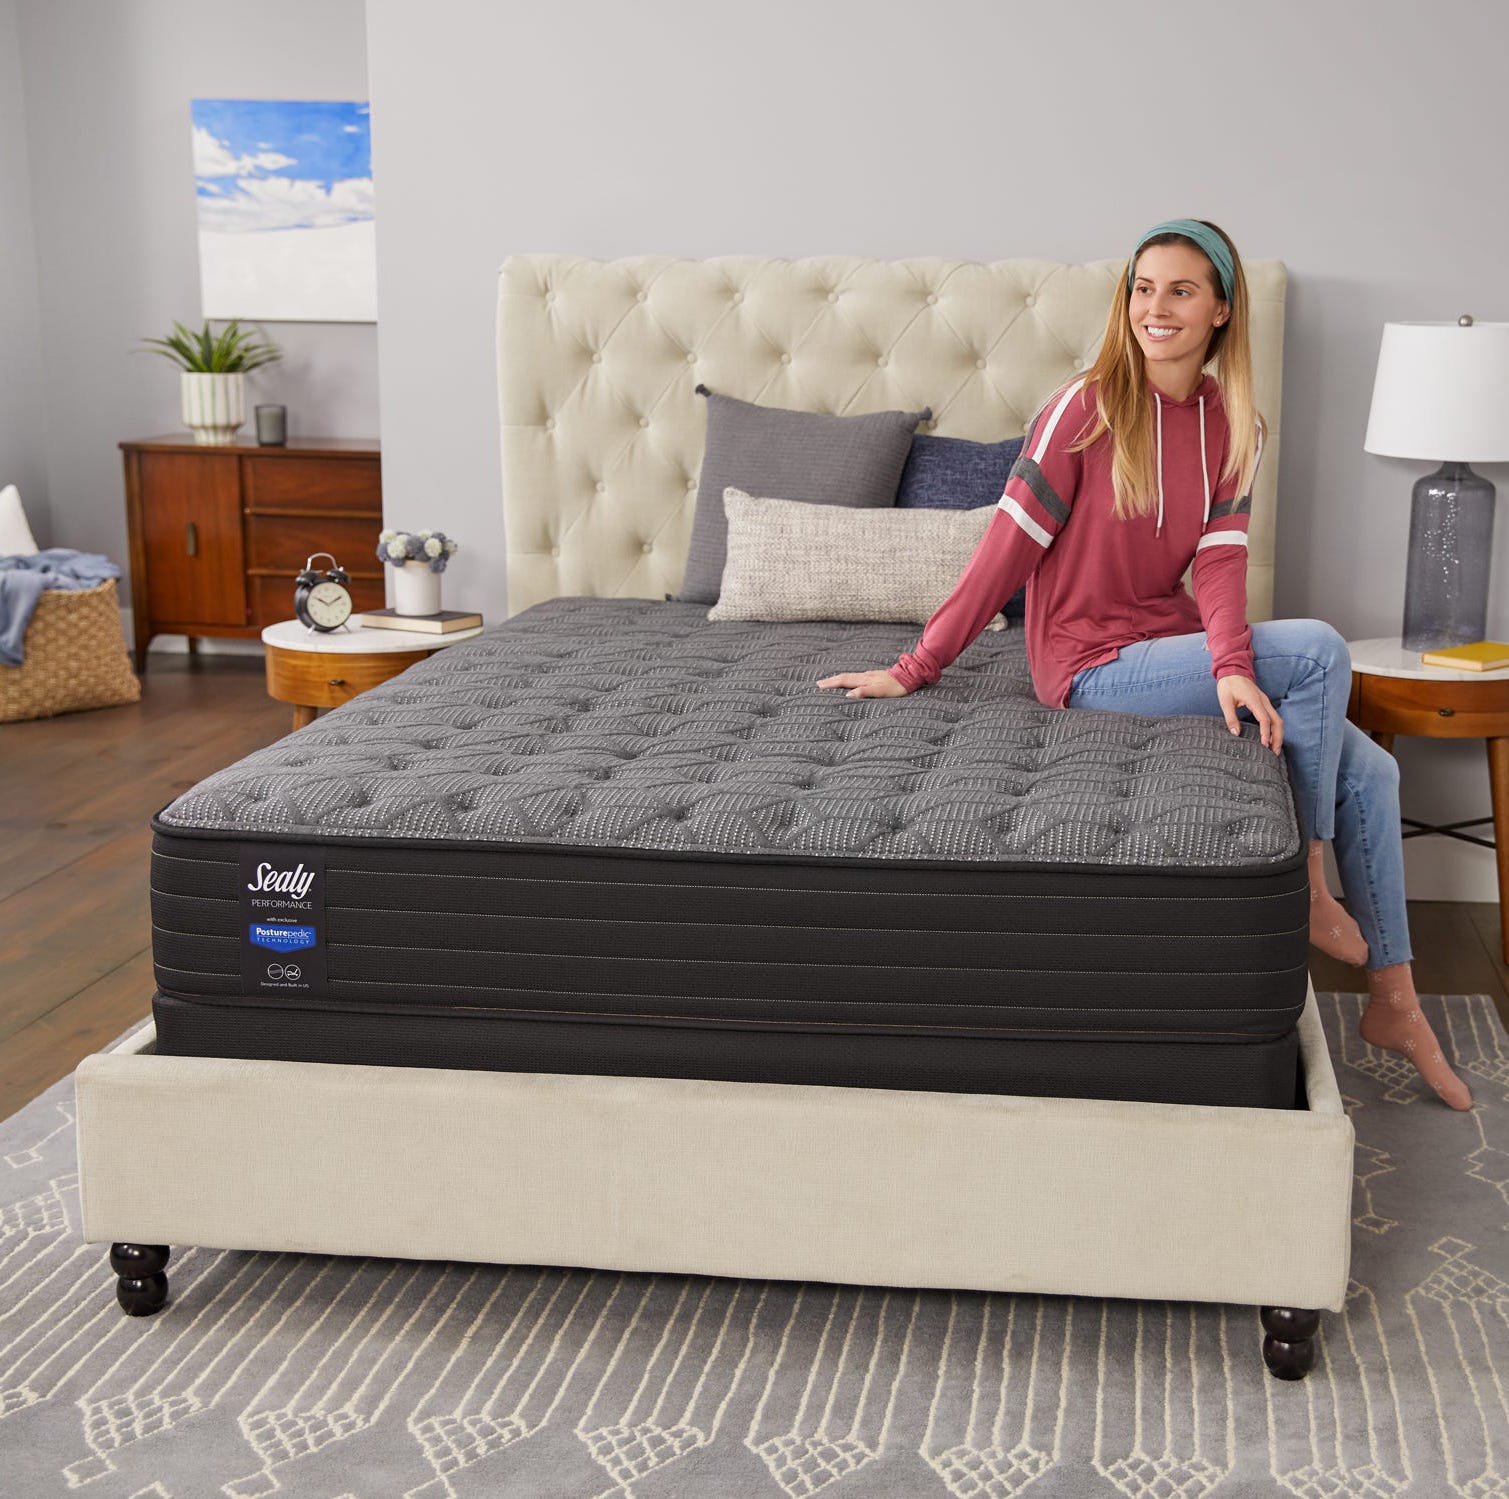 Sealy Response Performance Firm Queen Mattress + More w/ Free Shipping & Removal $479